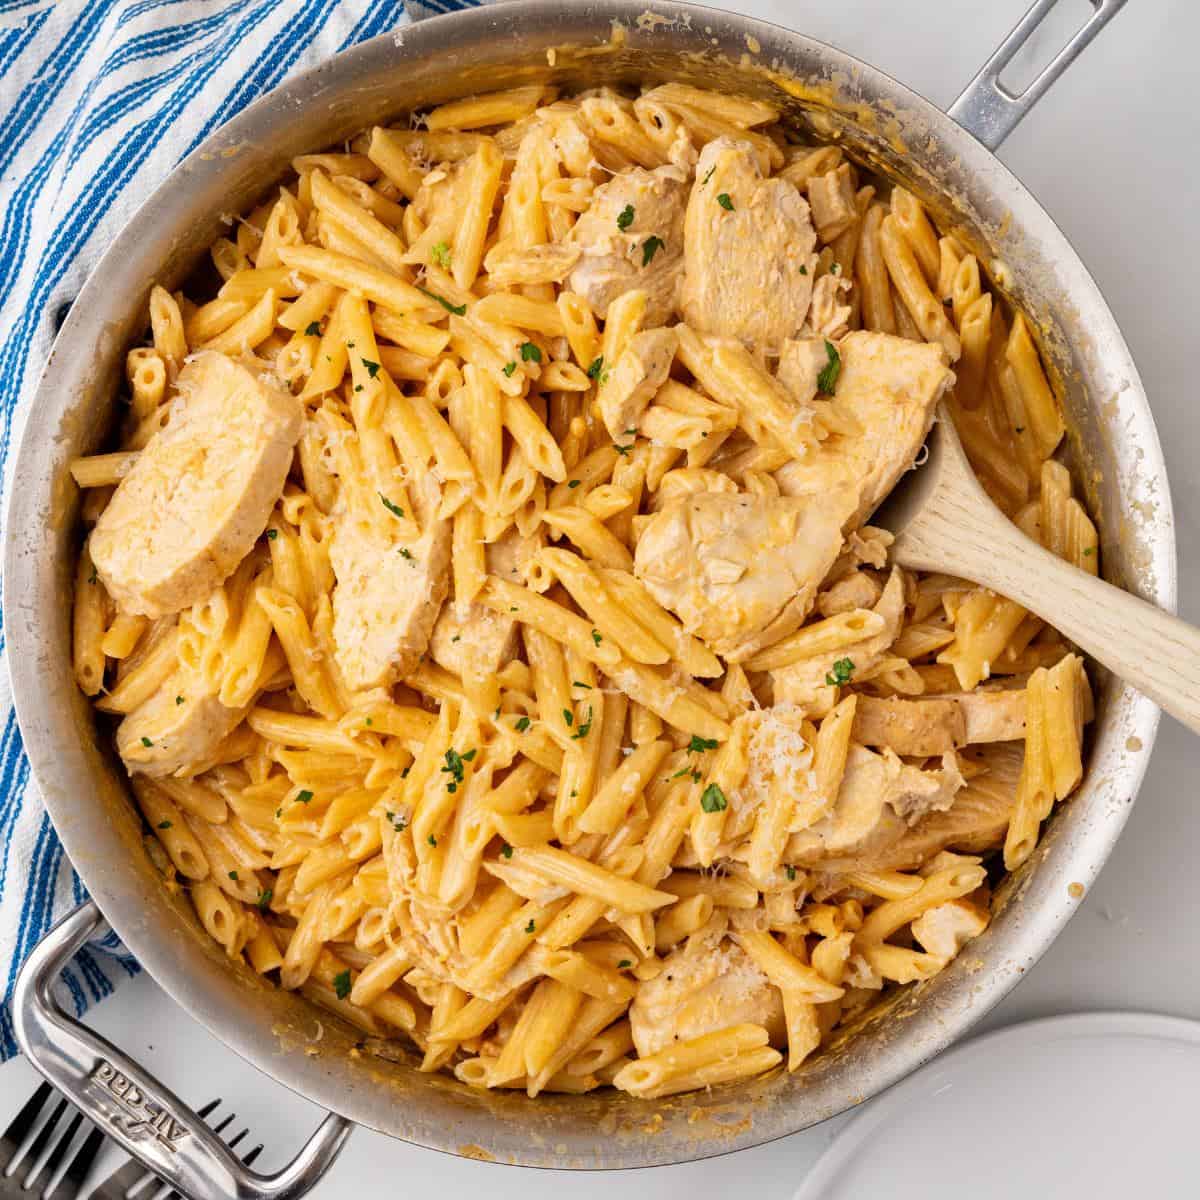 A skillet filled with creamy Buffalo Chicken Alfredo pasta, garnished with herbs, and a wooden spoon.